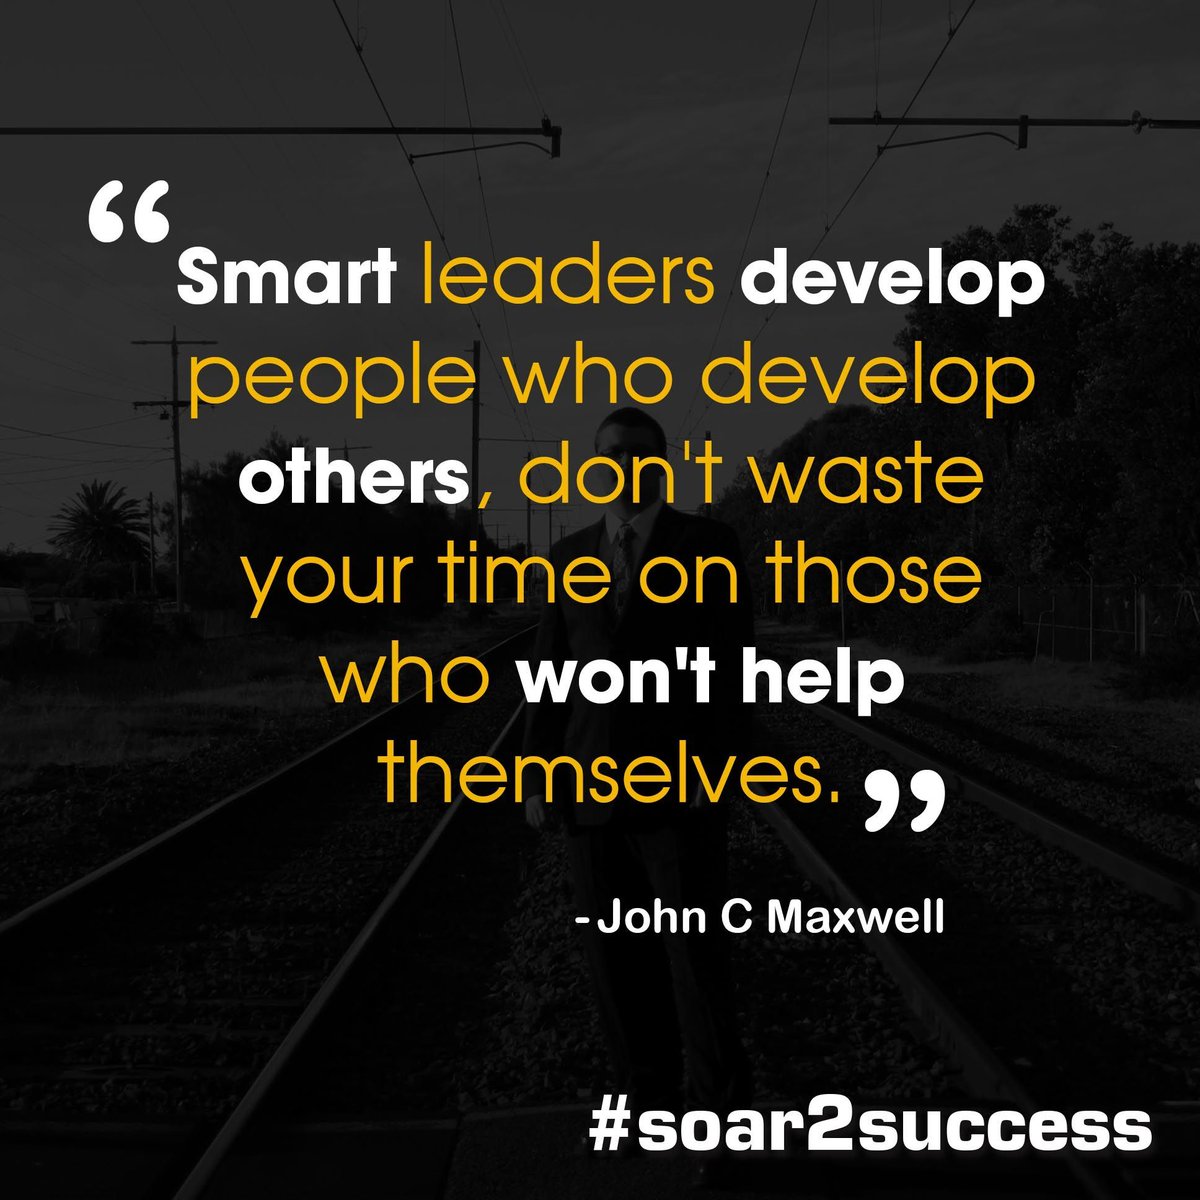 ''Smart leaders develop people who develop others, don't waste your time on those who won't help themselves.'' - John C Maxwell #Leadership #Pilotspeaker #Soar2Success